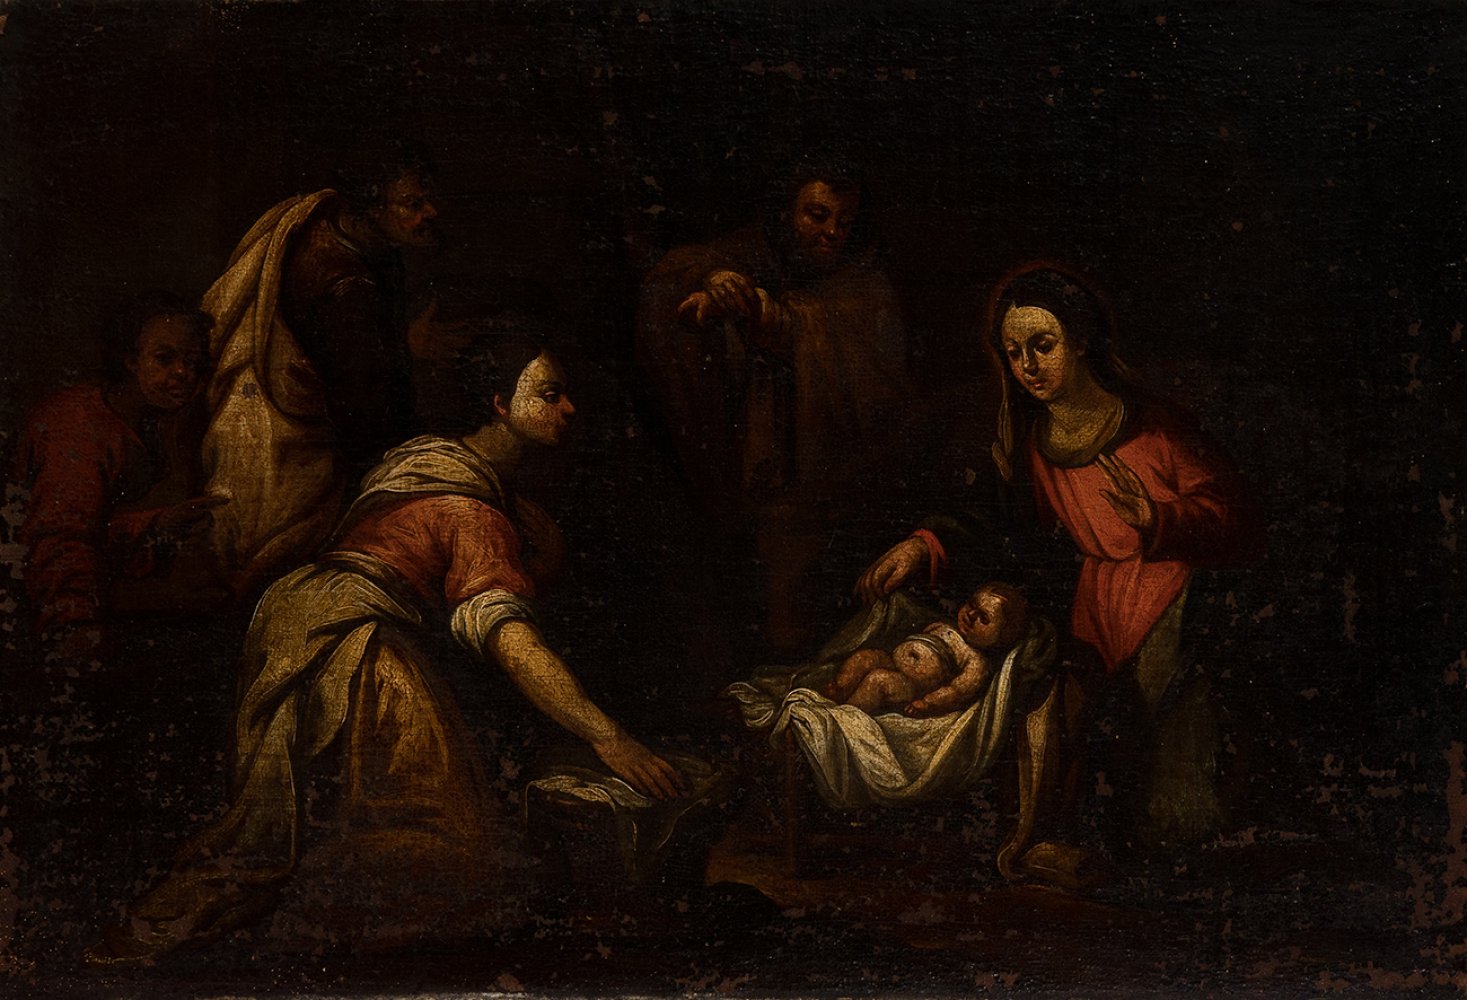 Sevillian school; late 17th century."Adoration of the Shepherds".Oil on canvas. Re-drawn.It presents